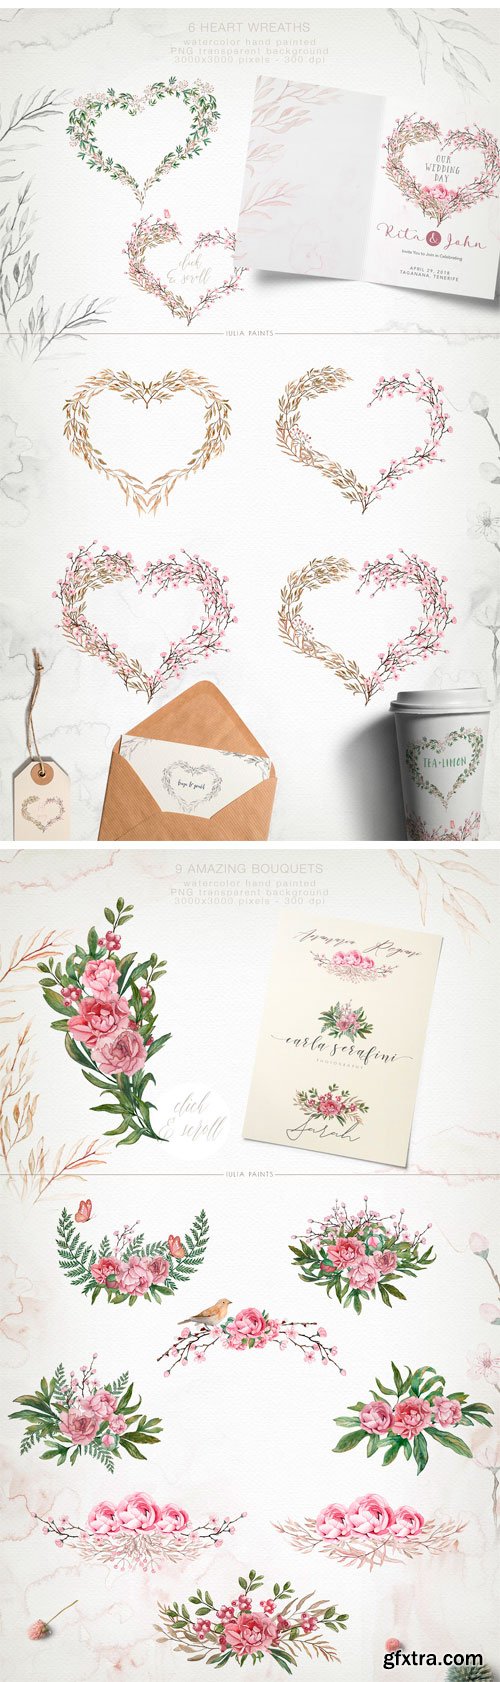 CM - Add Peonies - Watercolor Graphic Set 1868042